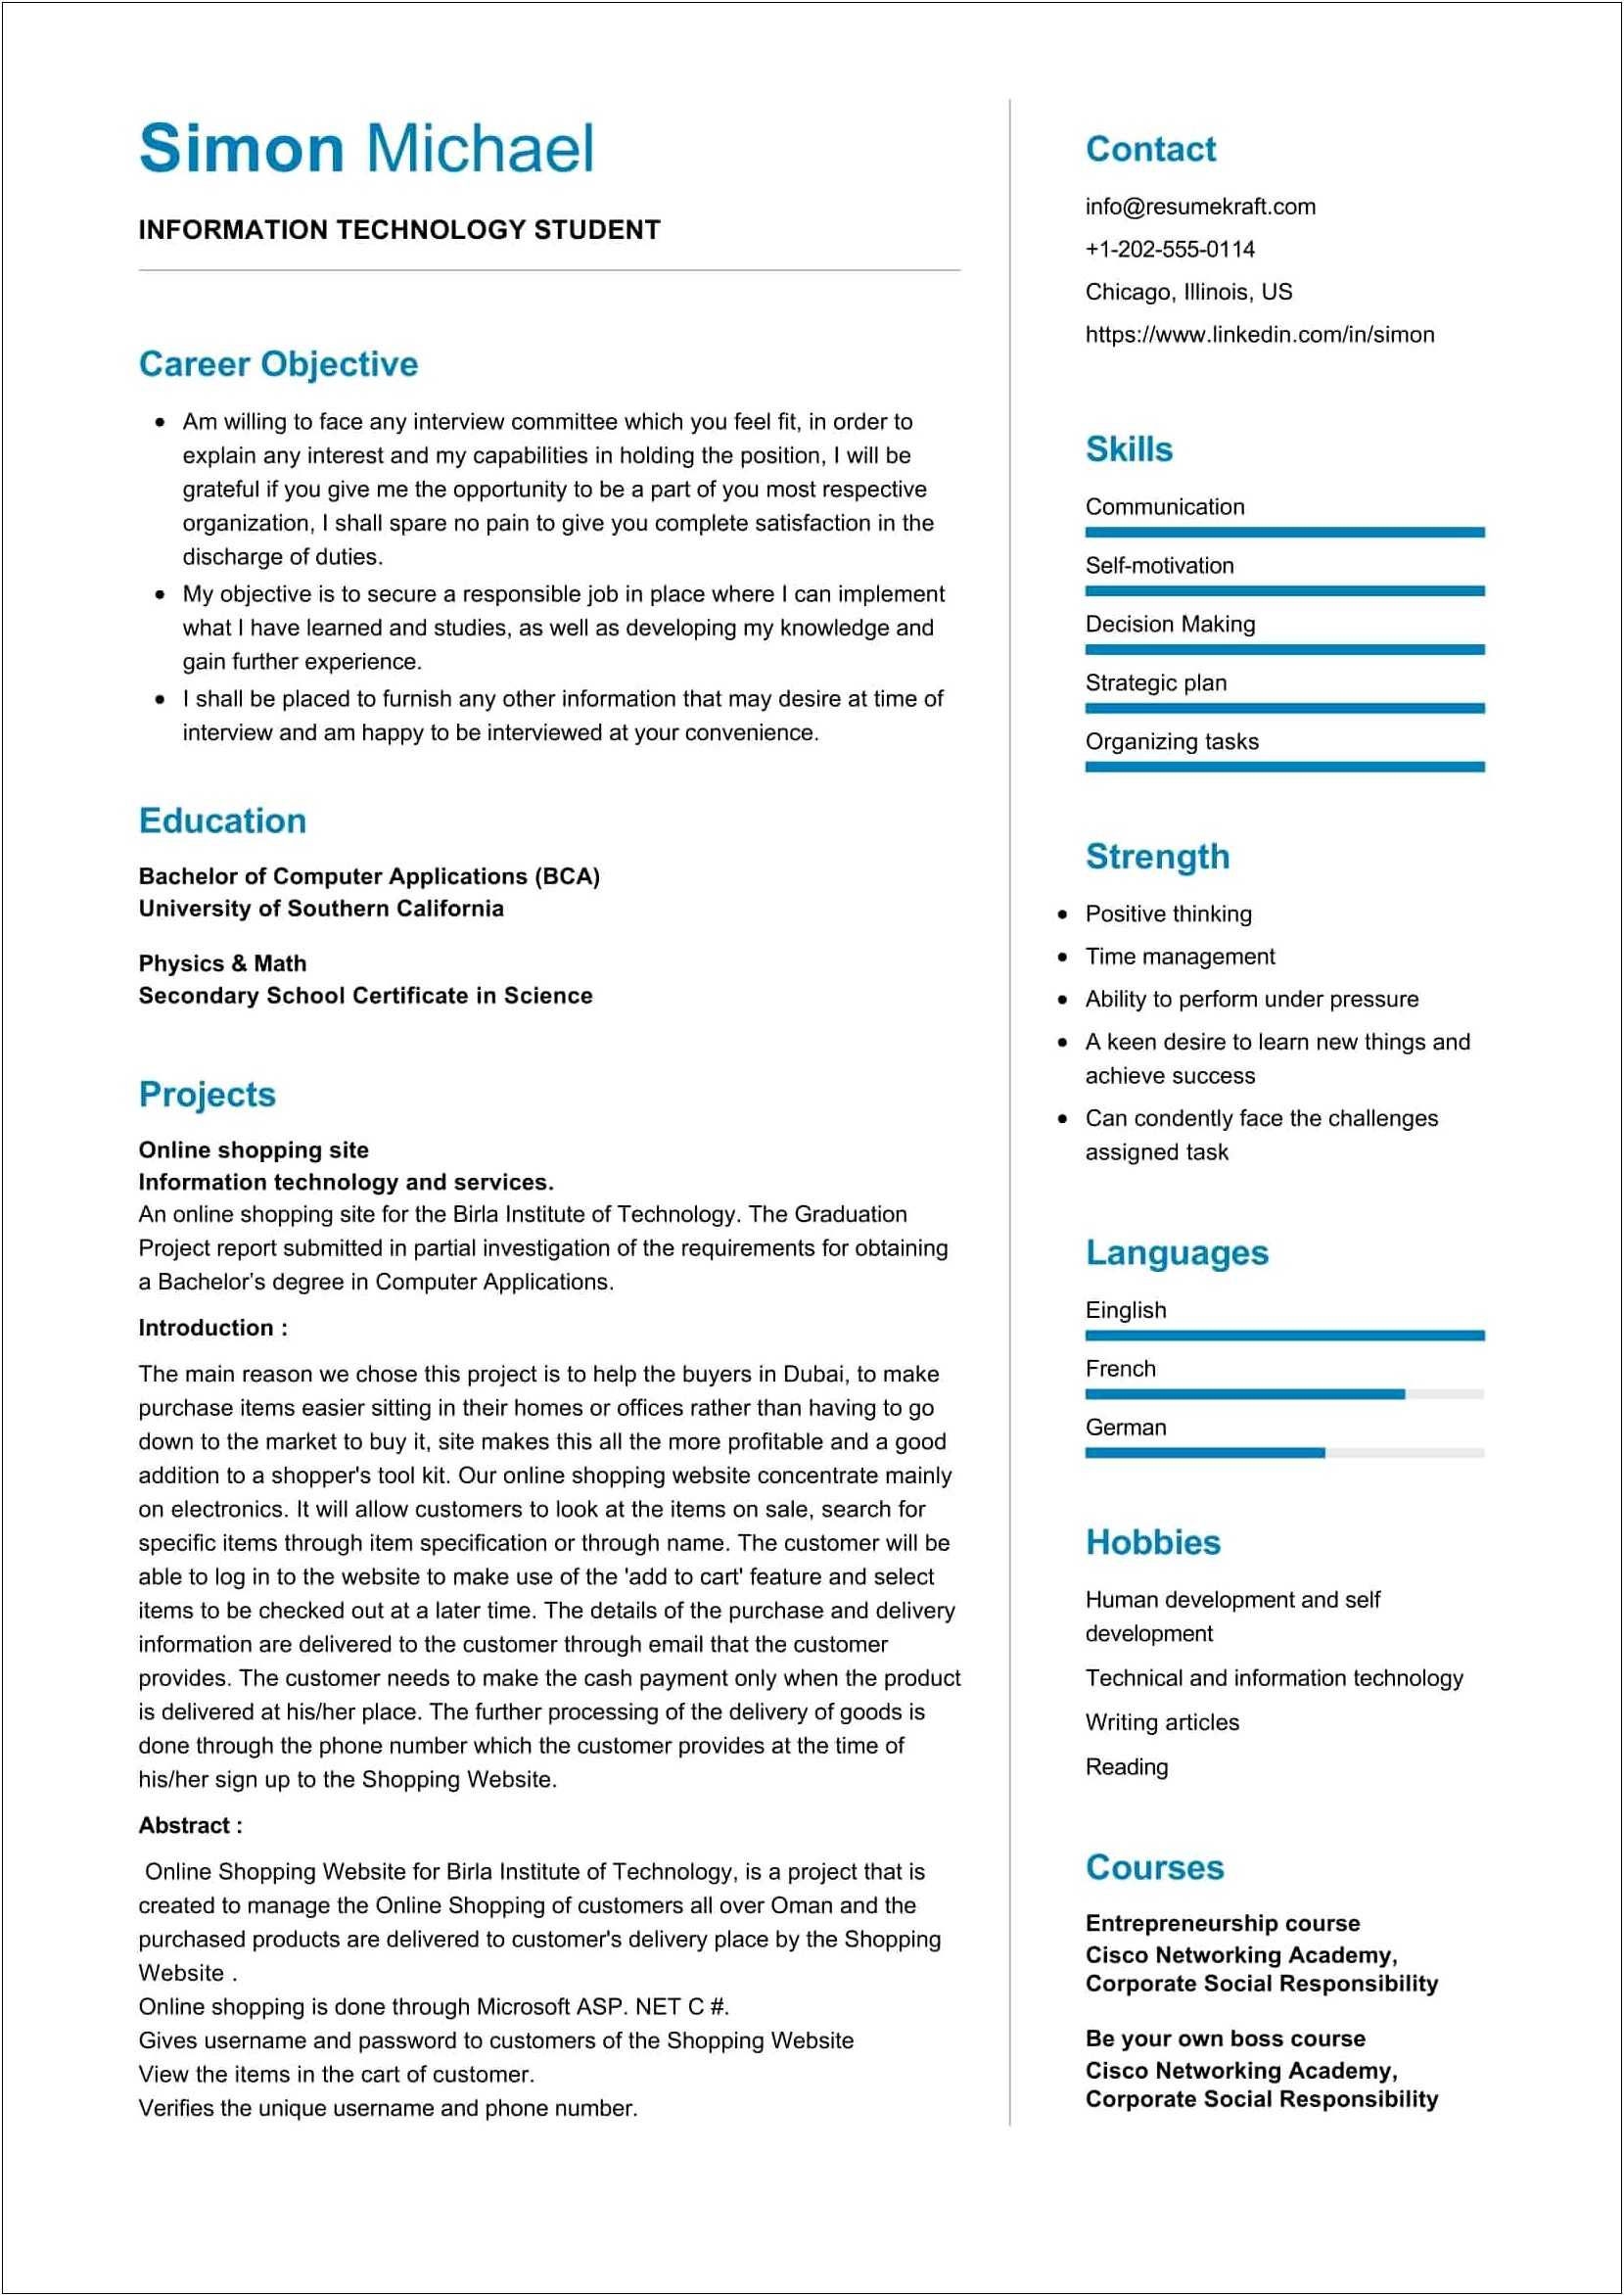 Resume Objective Example Information Technology